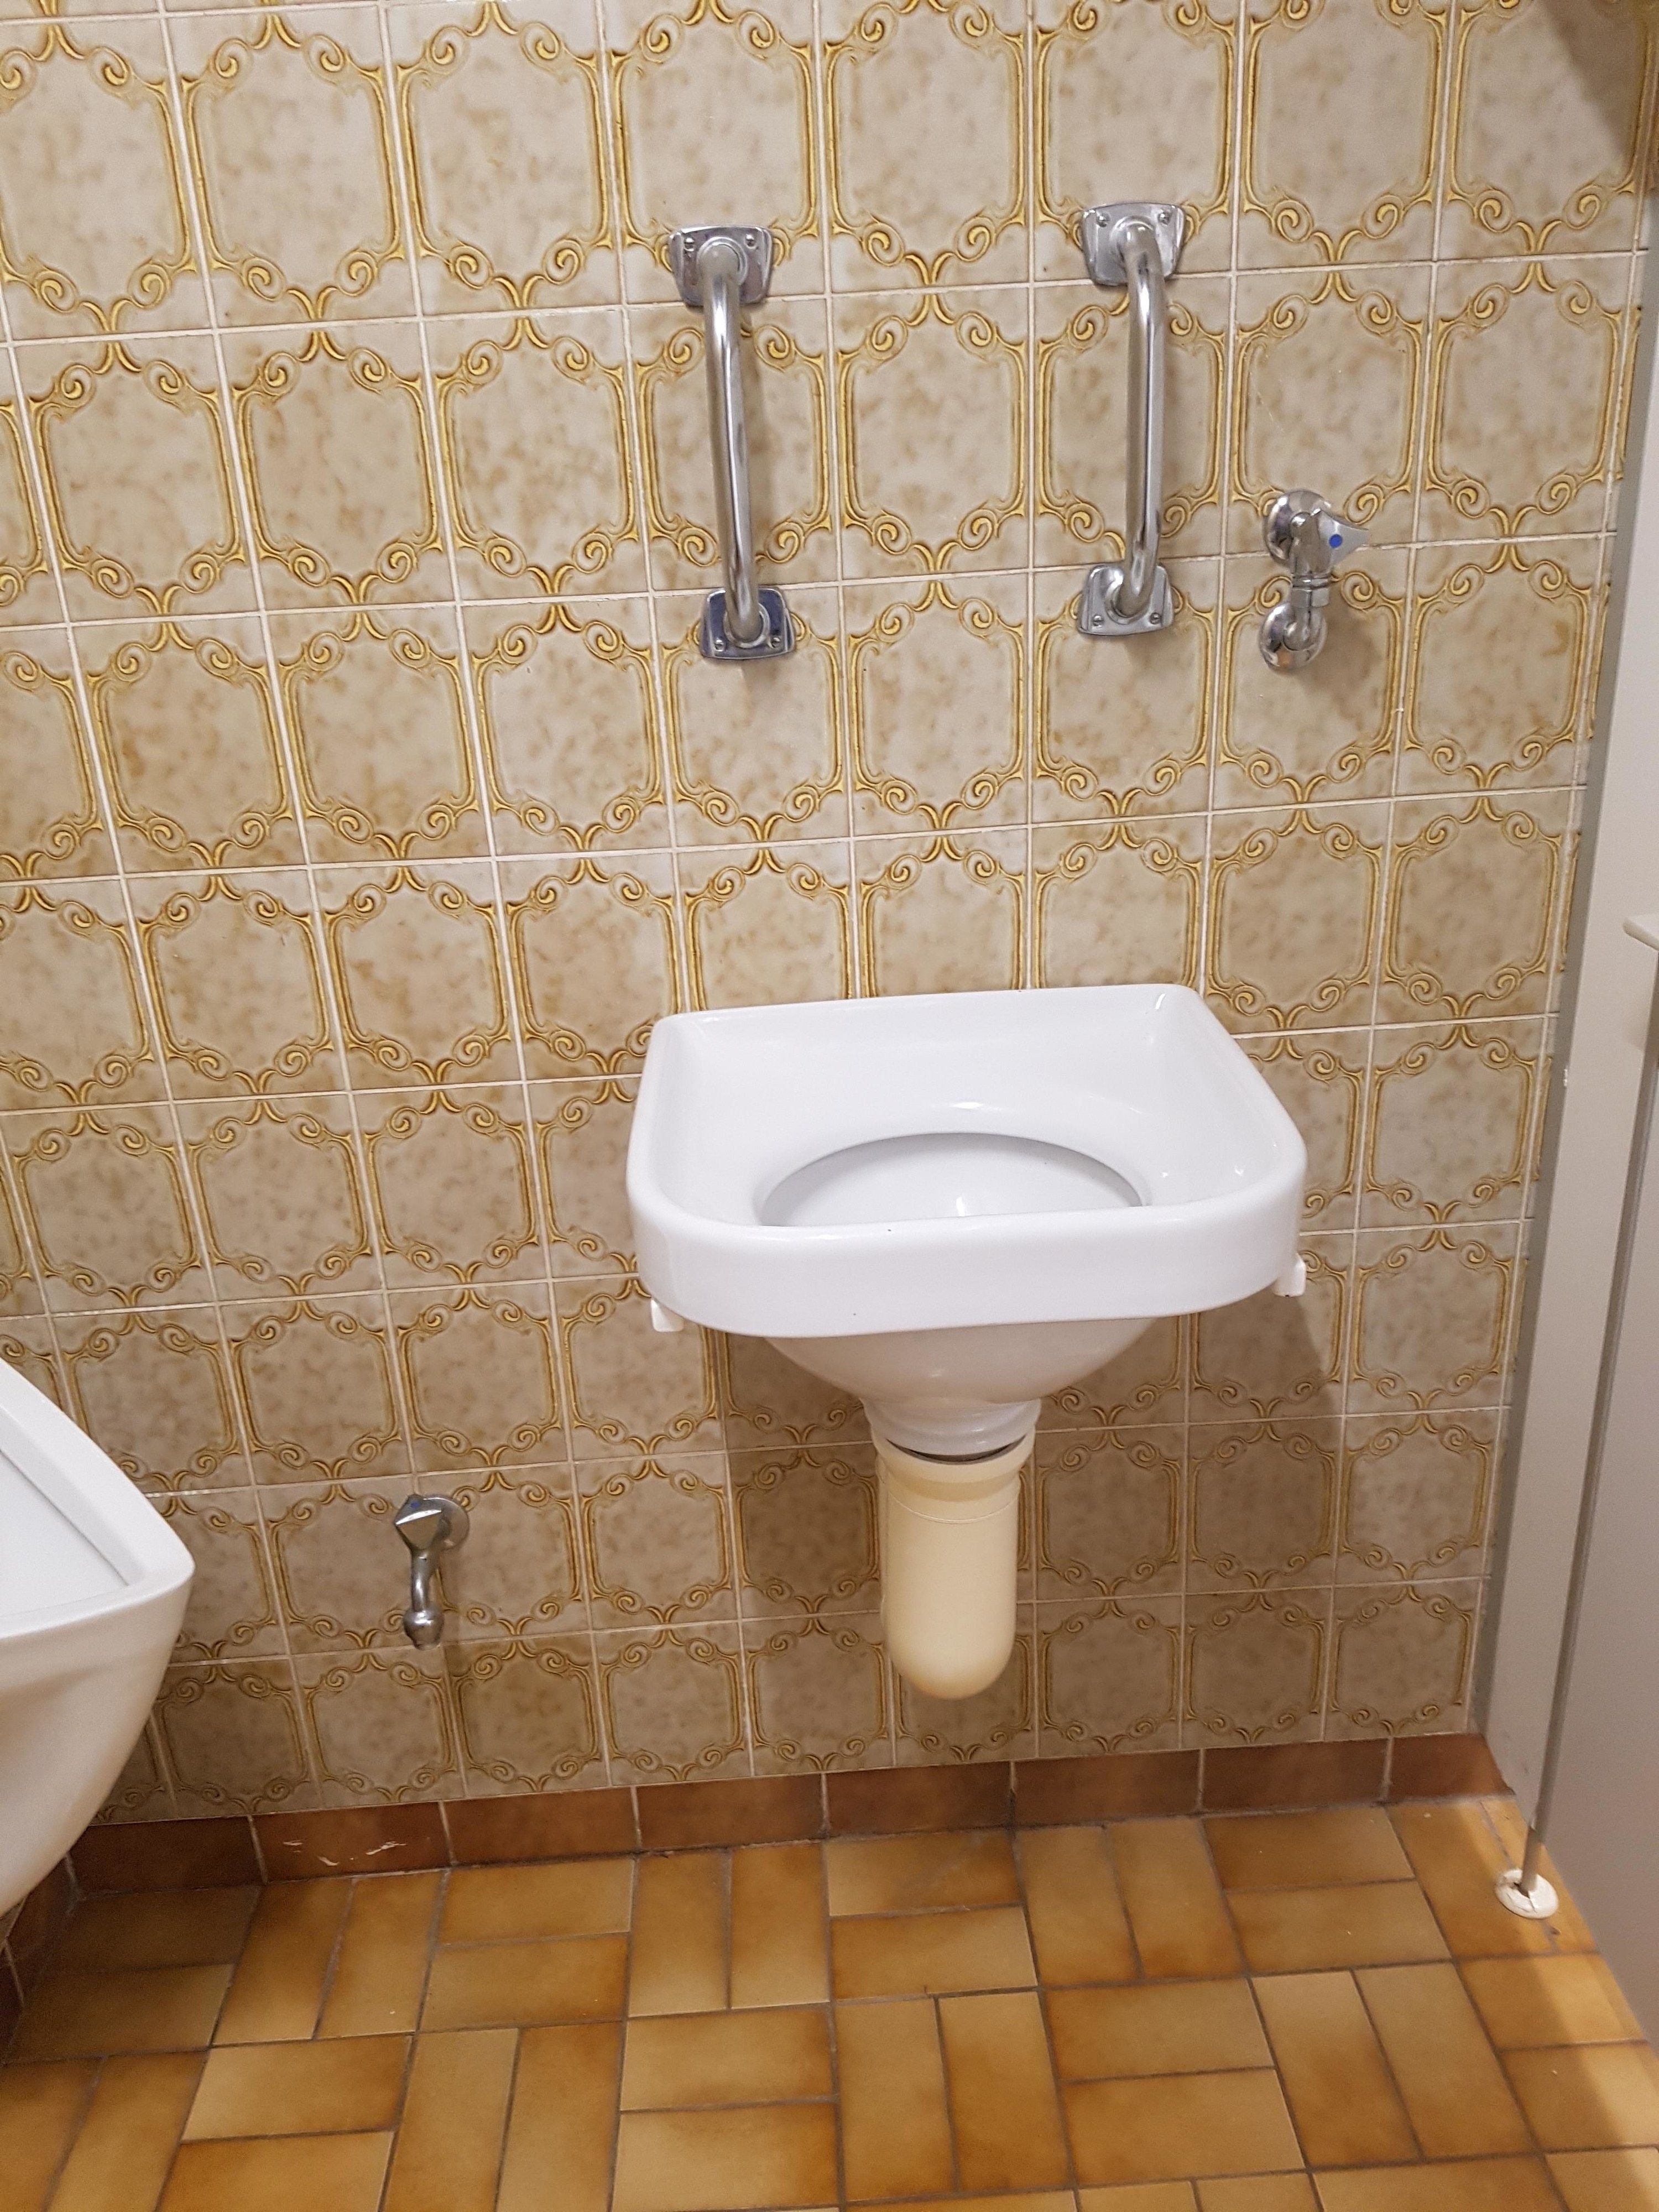 A small sink that looks more like a toilet